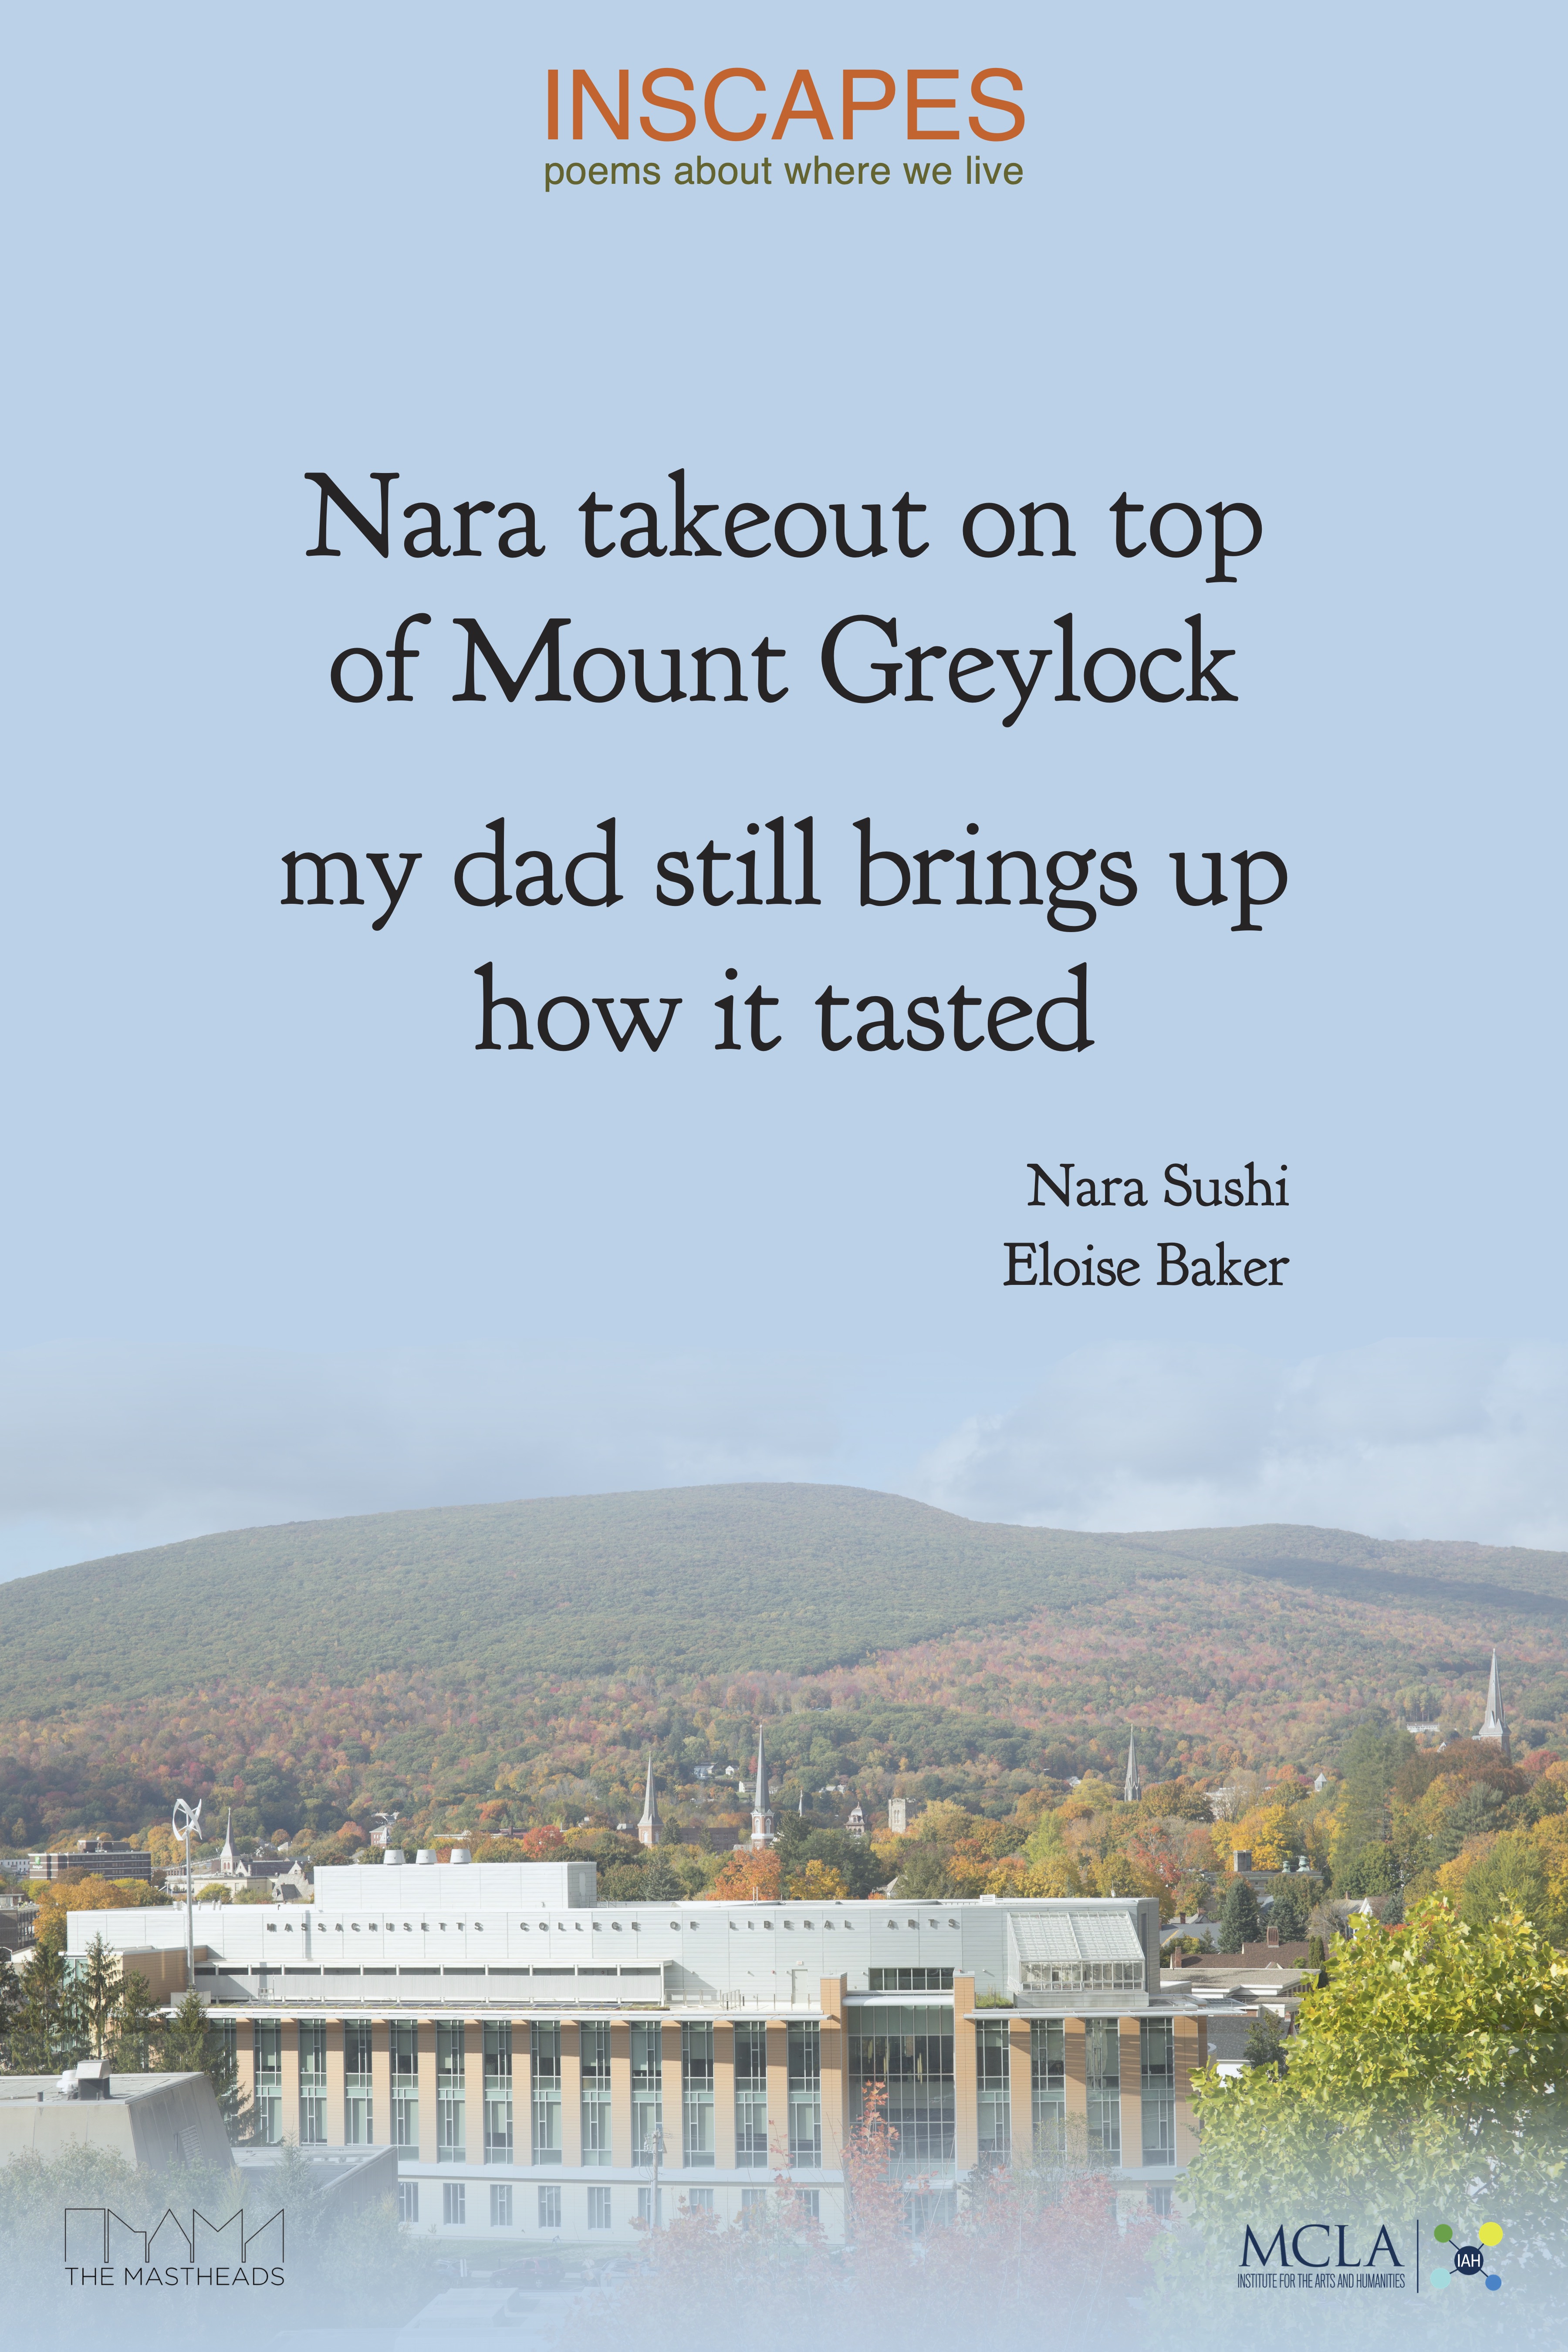 Poster with a poem that goes Nara takeout on top of Mount Greylock/my dad still brings up how it tasted